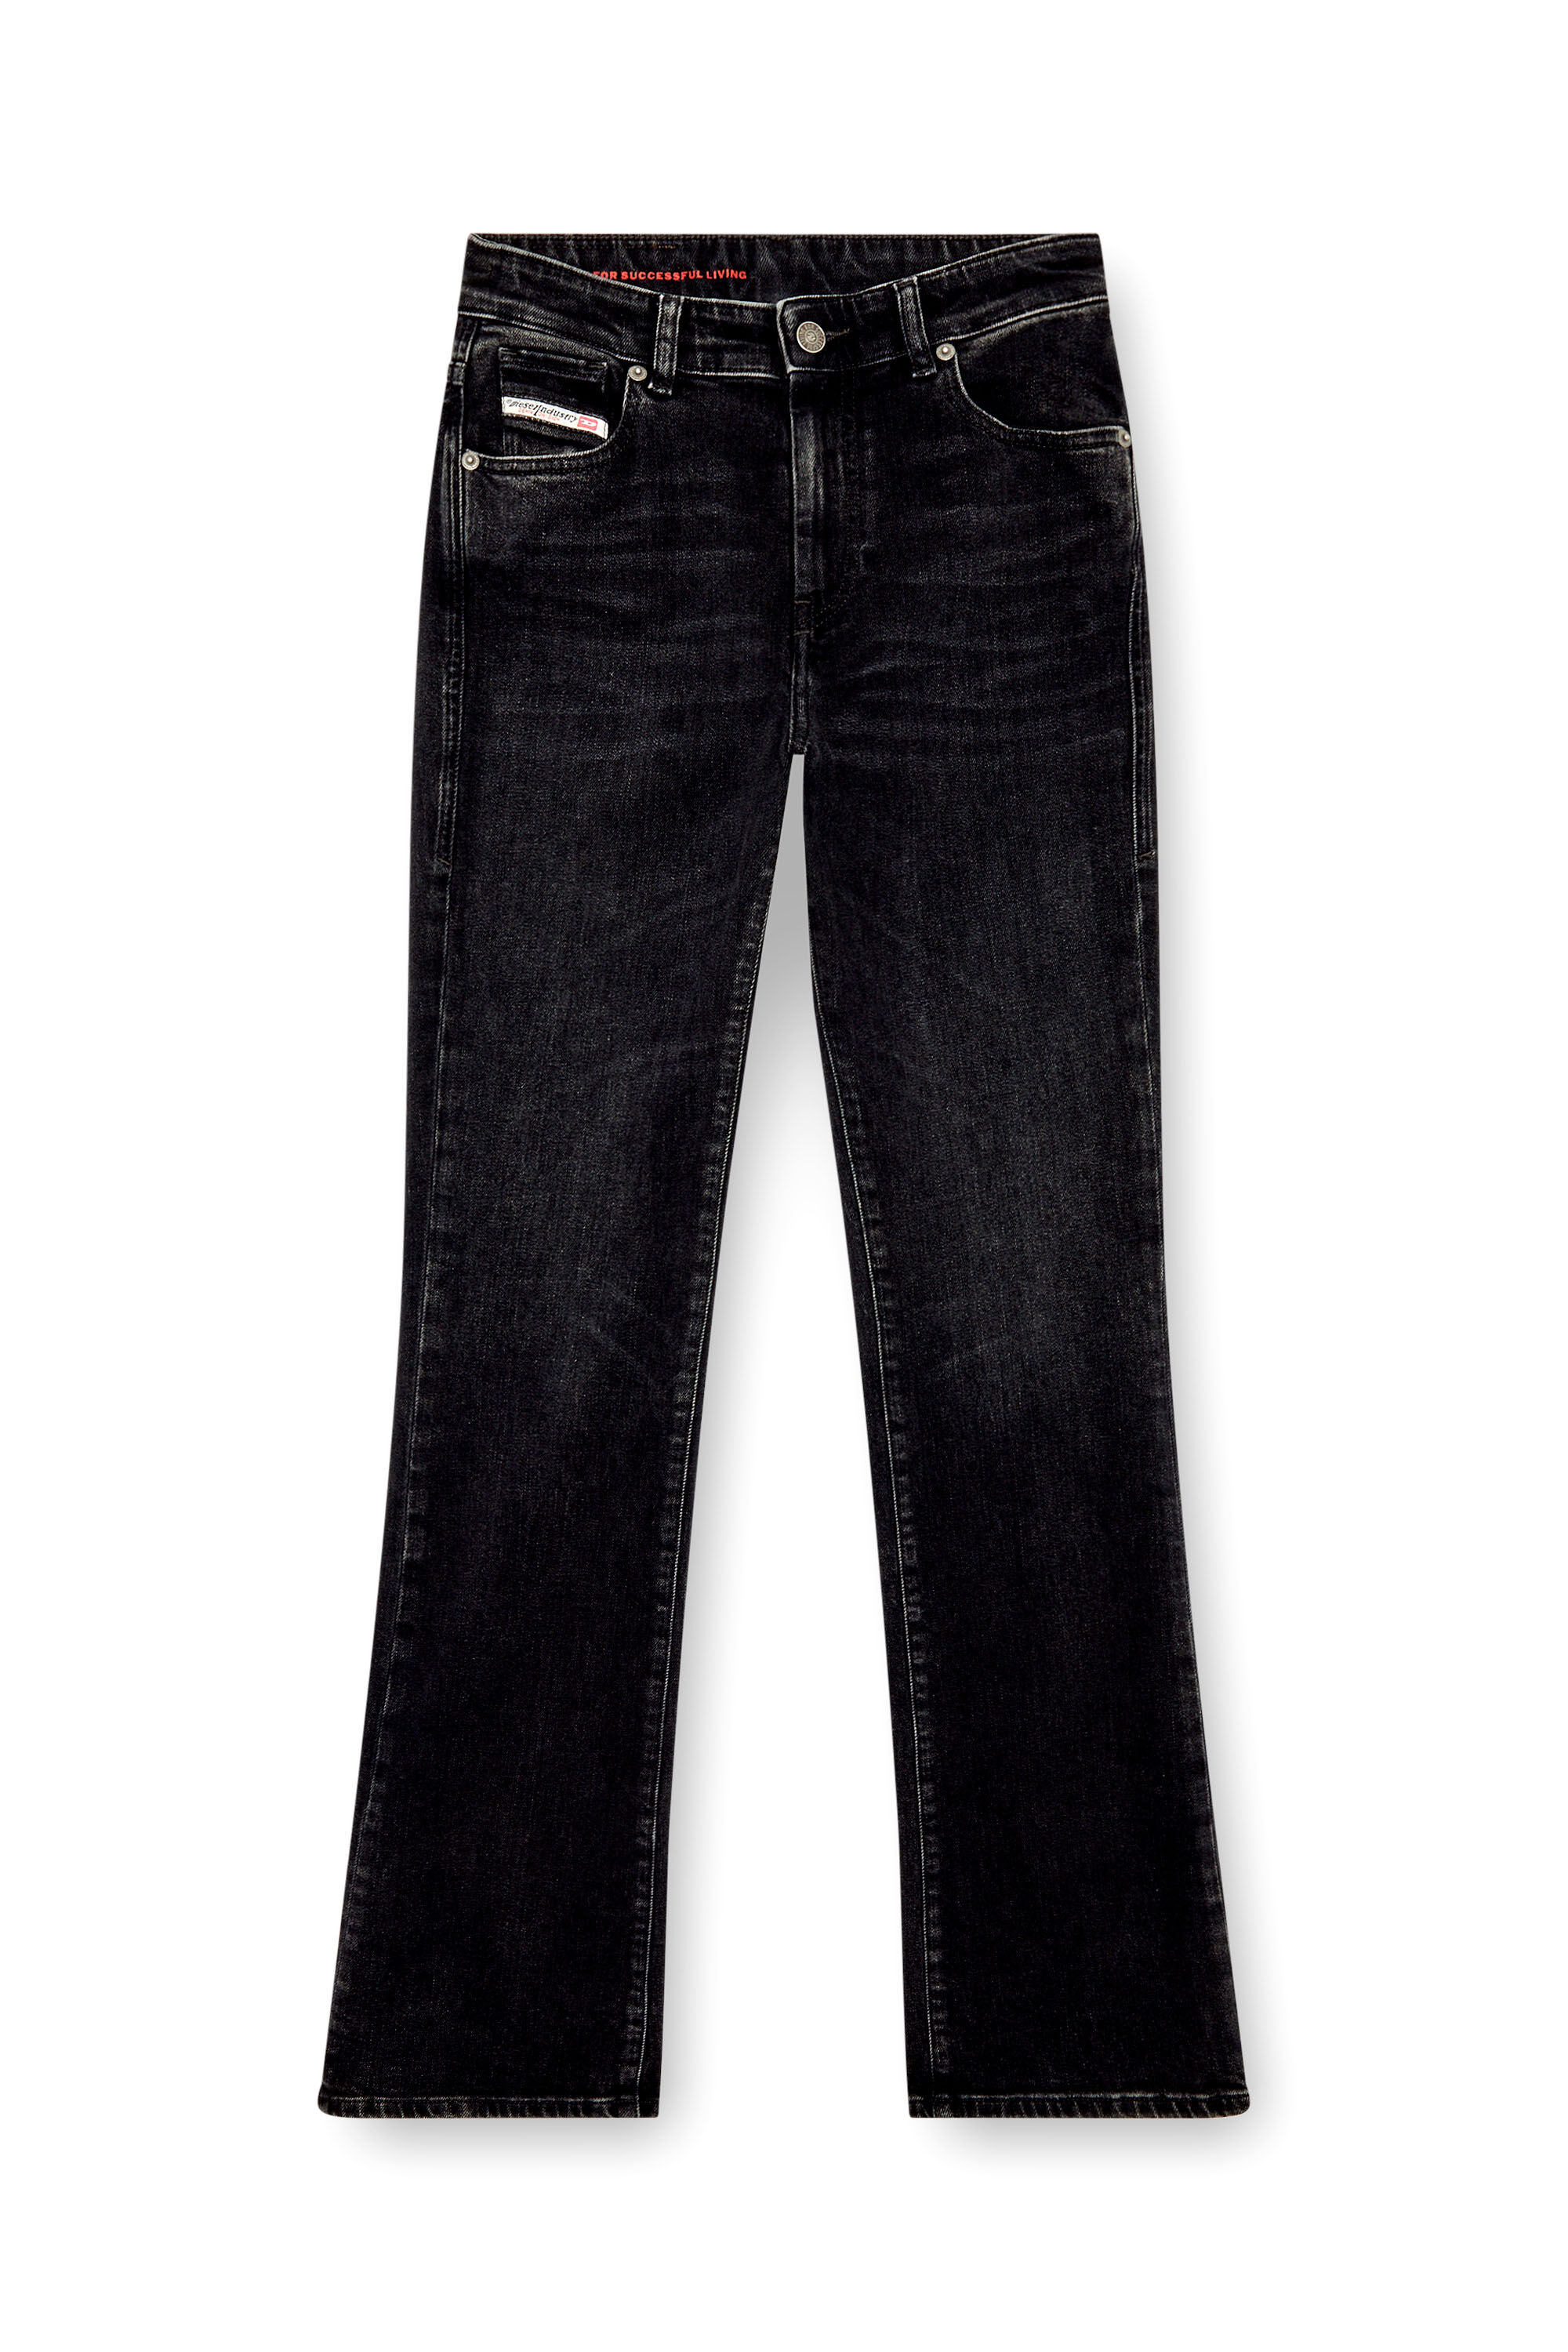 Diesel - Bootcut and Flare Jeans 2003 D-Escription 09I30, Mujer Bootcut y Flare Jeans - 2003 D-Escription in Negro - Image 2